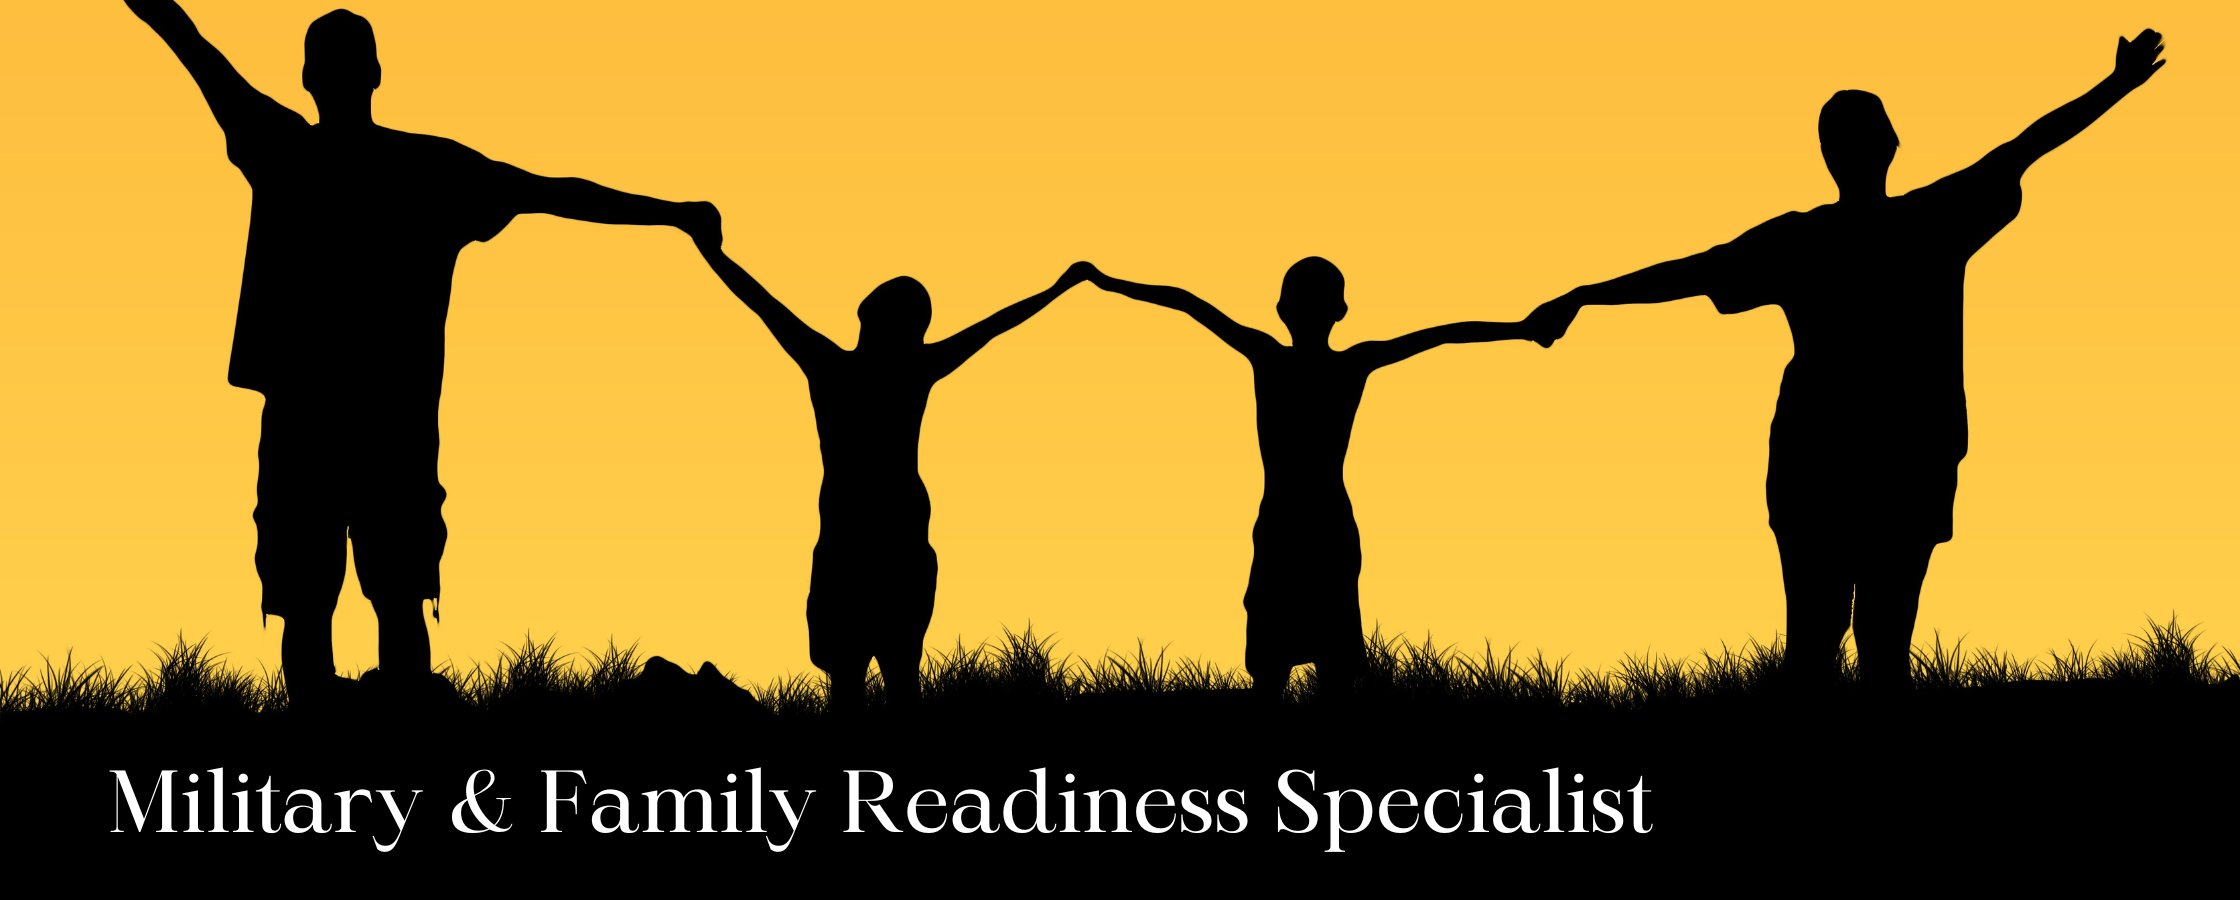 Military & Family Readiness Specialist banner.png